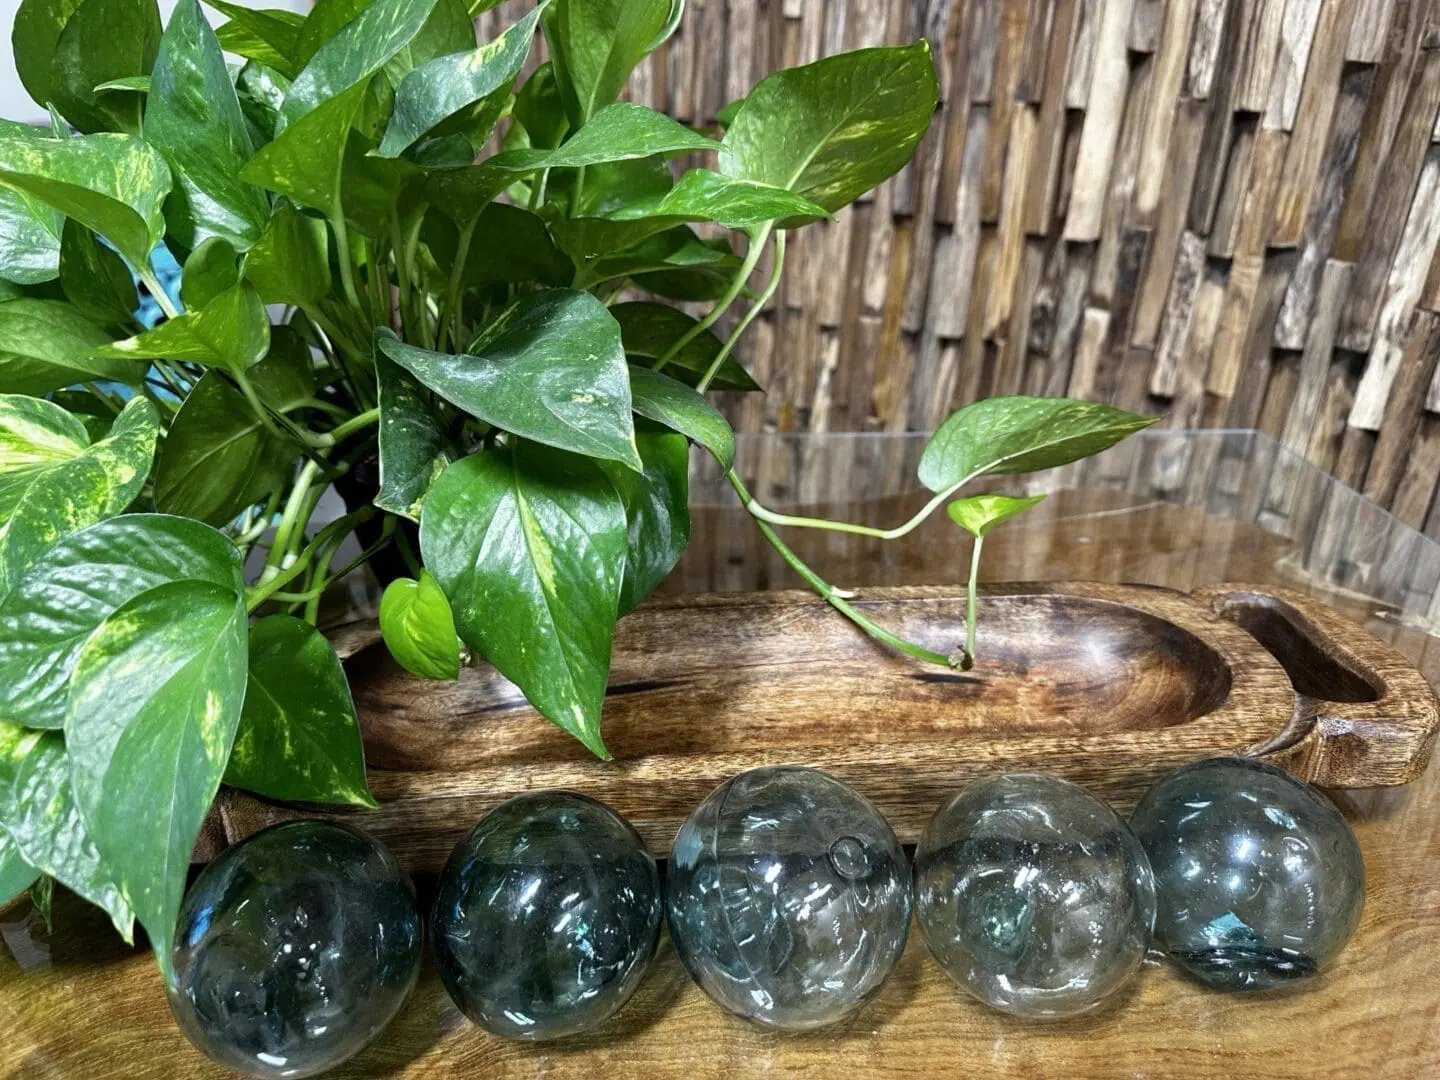 A wooden bowl with glass balls and a plant.